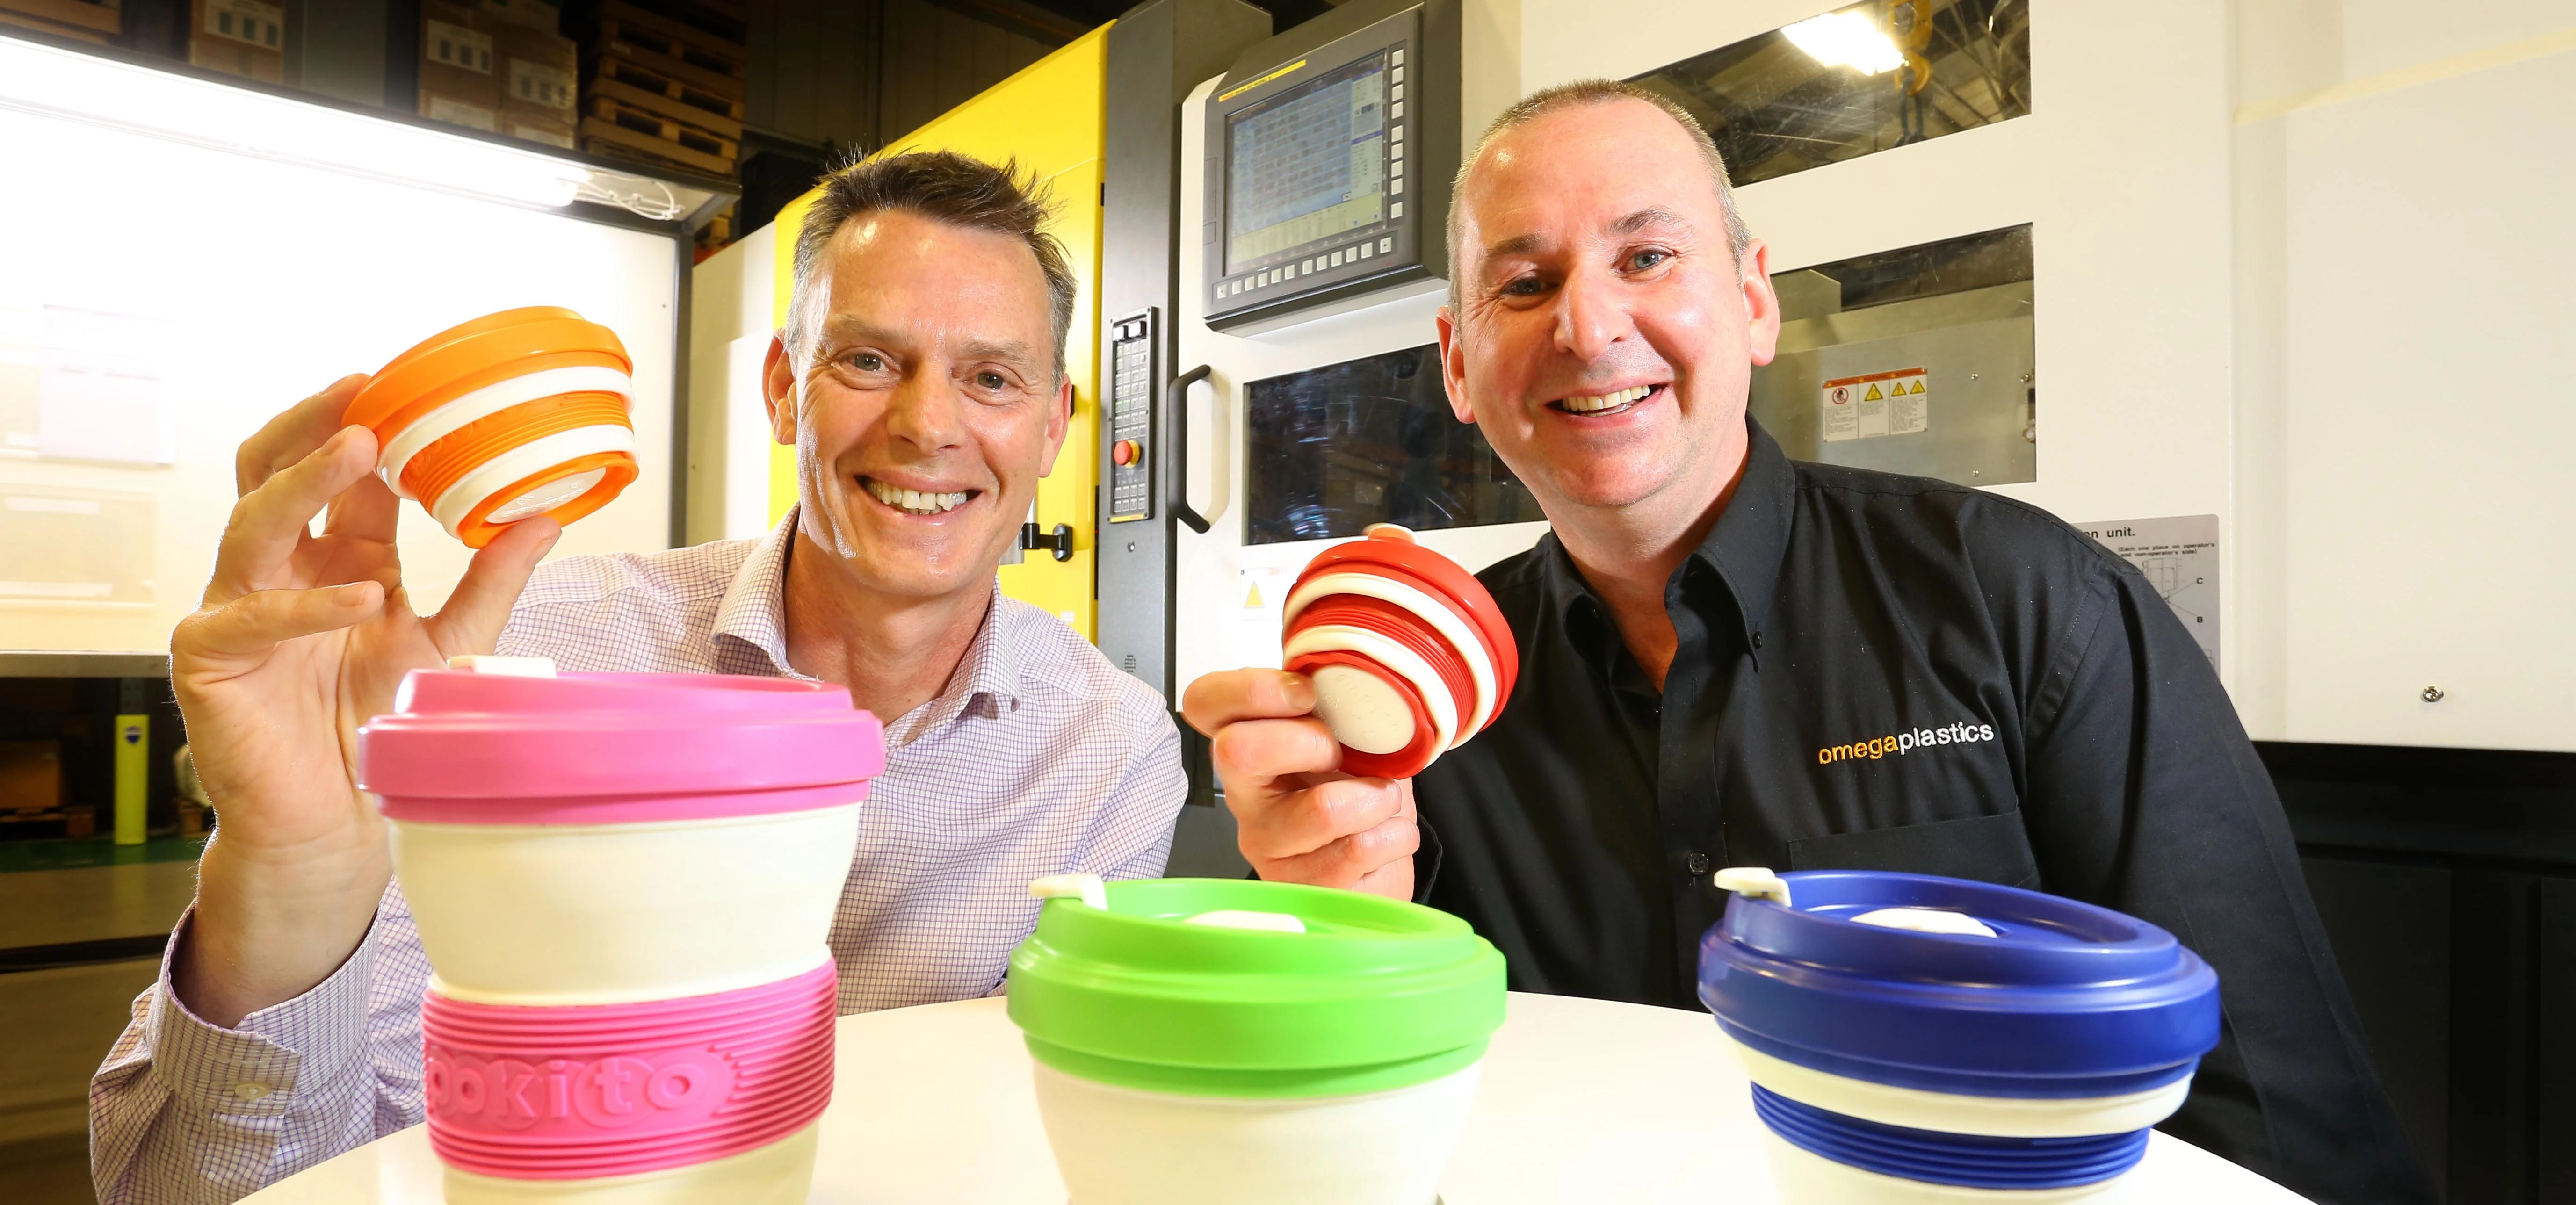 Andrew Brooks, creator of the Pokito with Gary Powner, managing director at Omega Plastics.